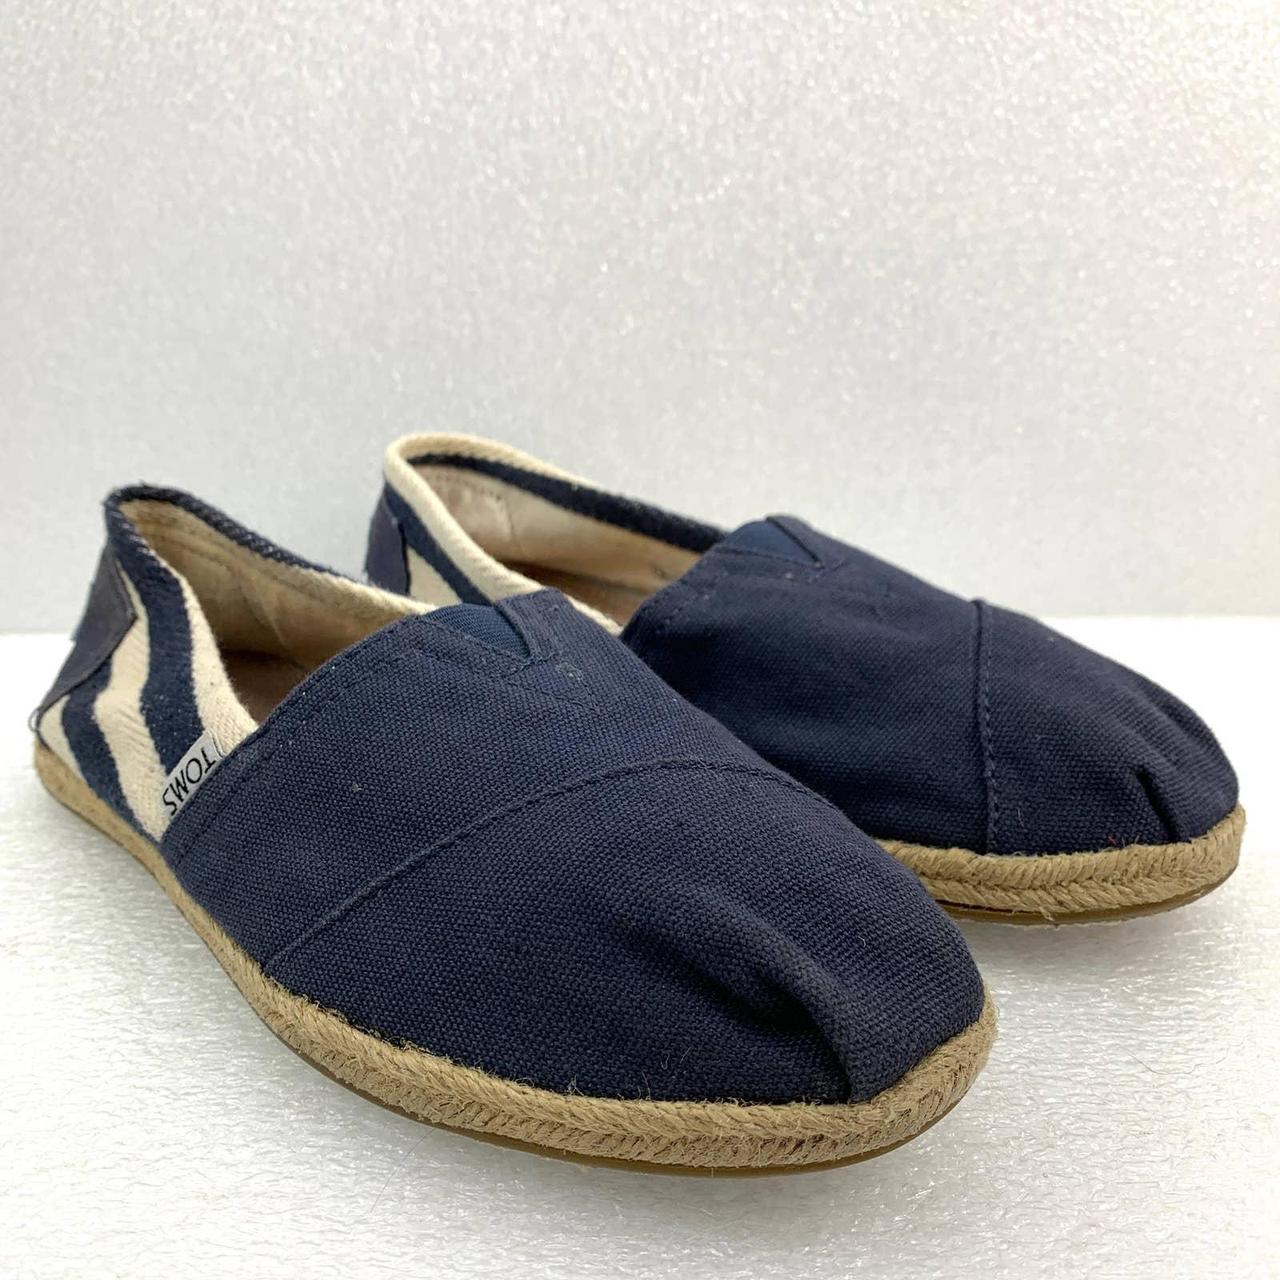 Toms Classic Slip-On Casual Shoes in Navy Blue ... - Depop